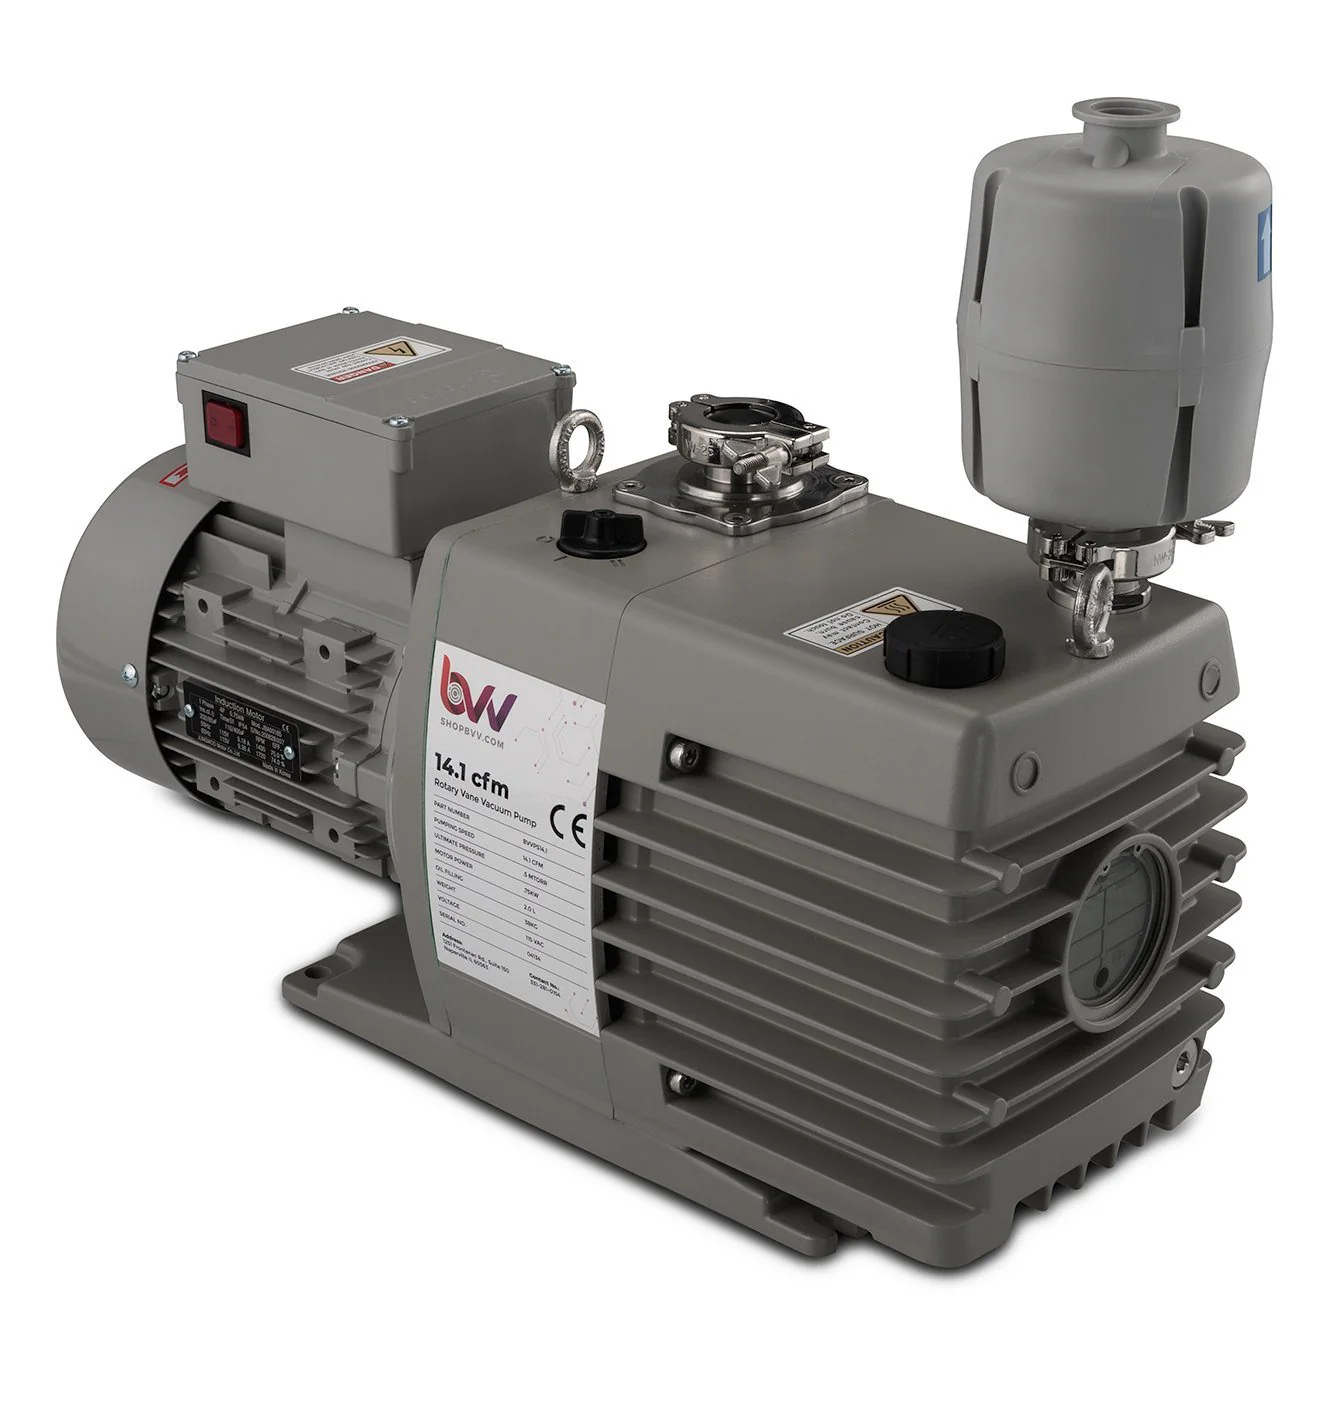 BVV™ Pro Series 14.1CFM Corrosion Resistant Two Stage Vacuum Pump Questions & Answers